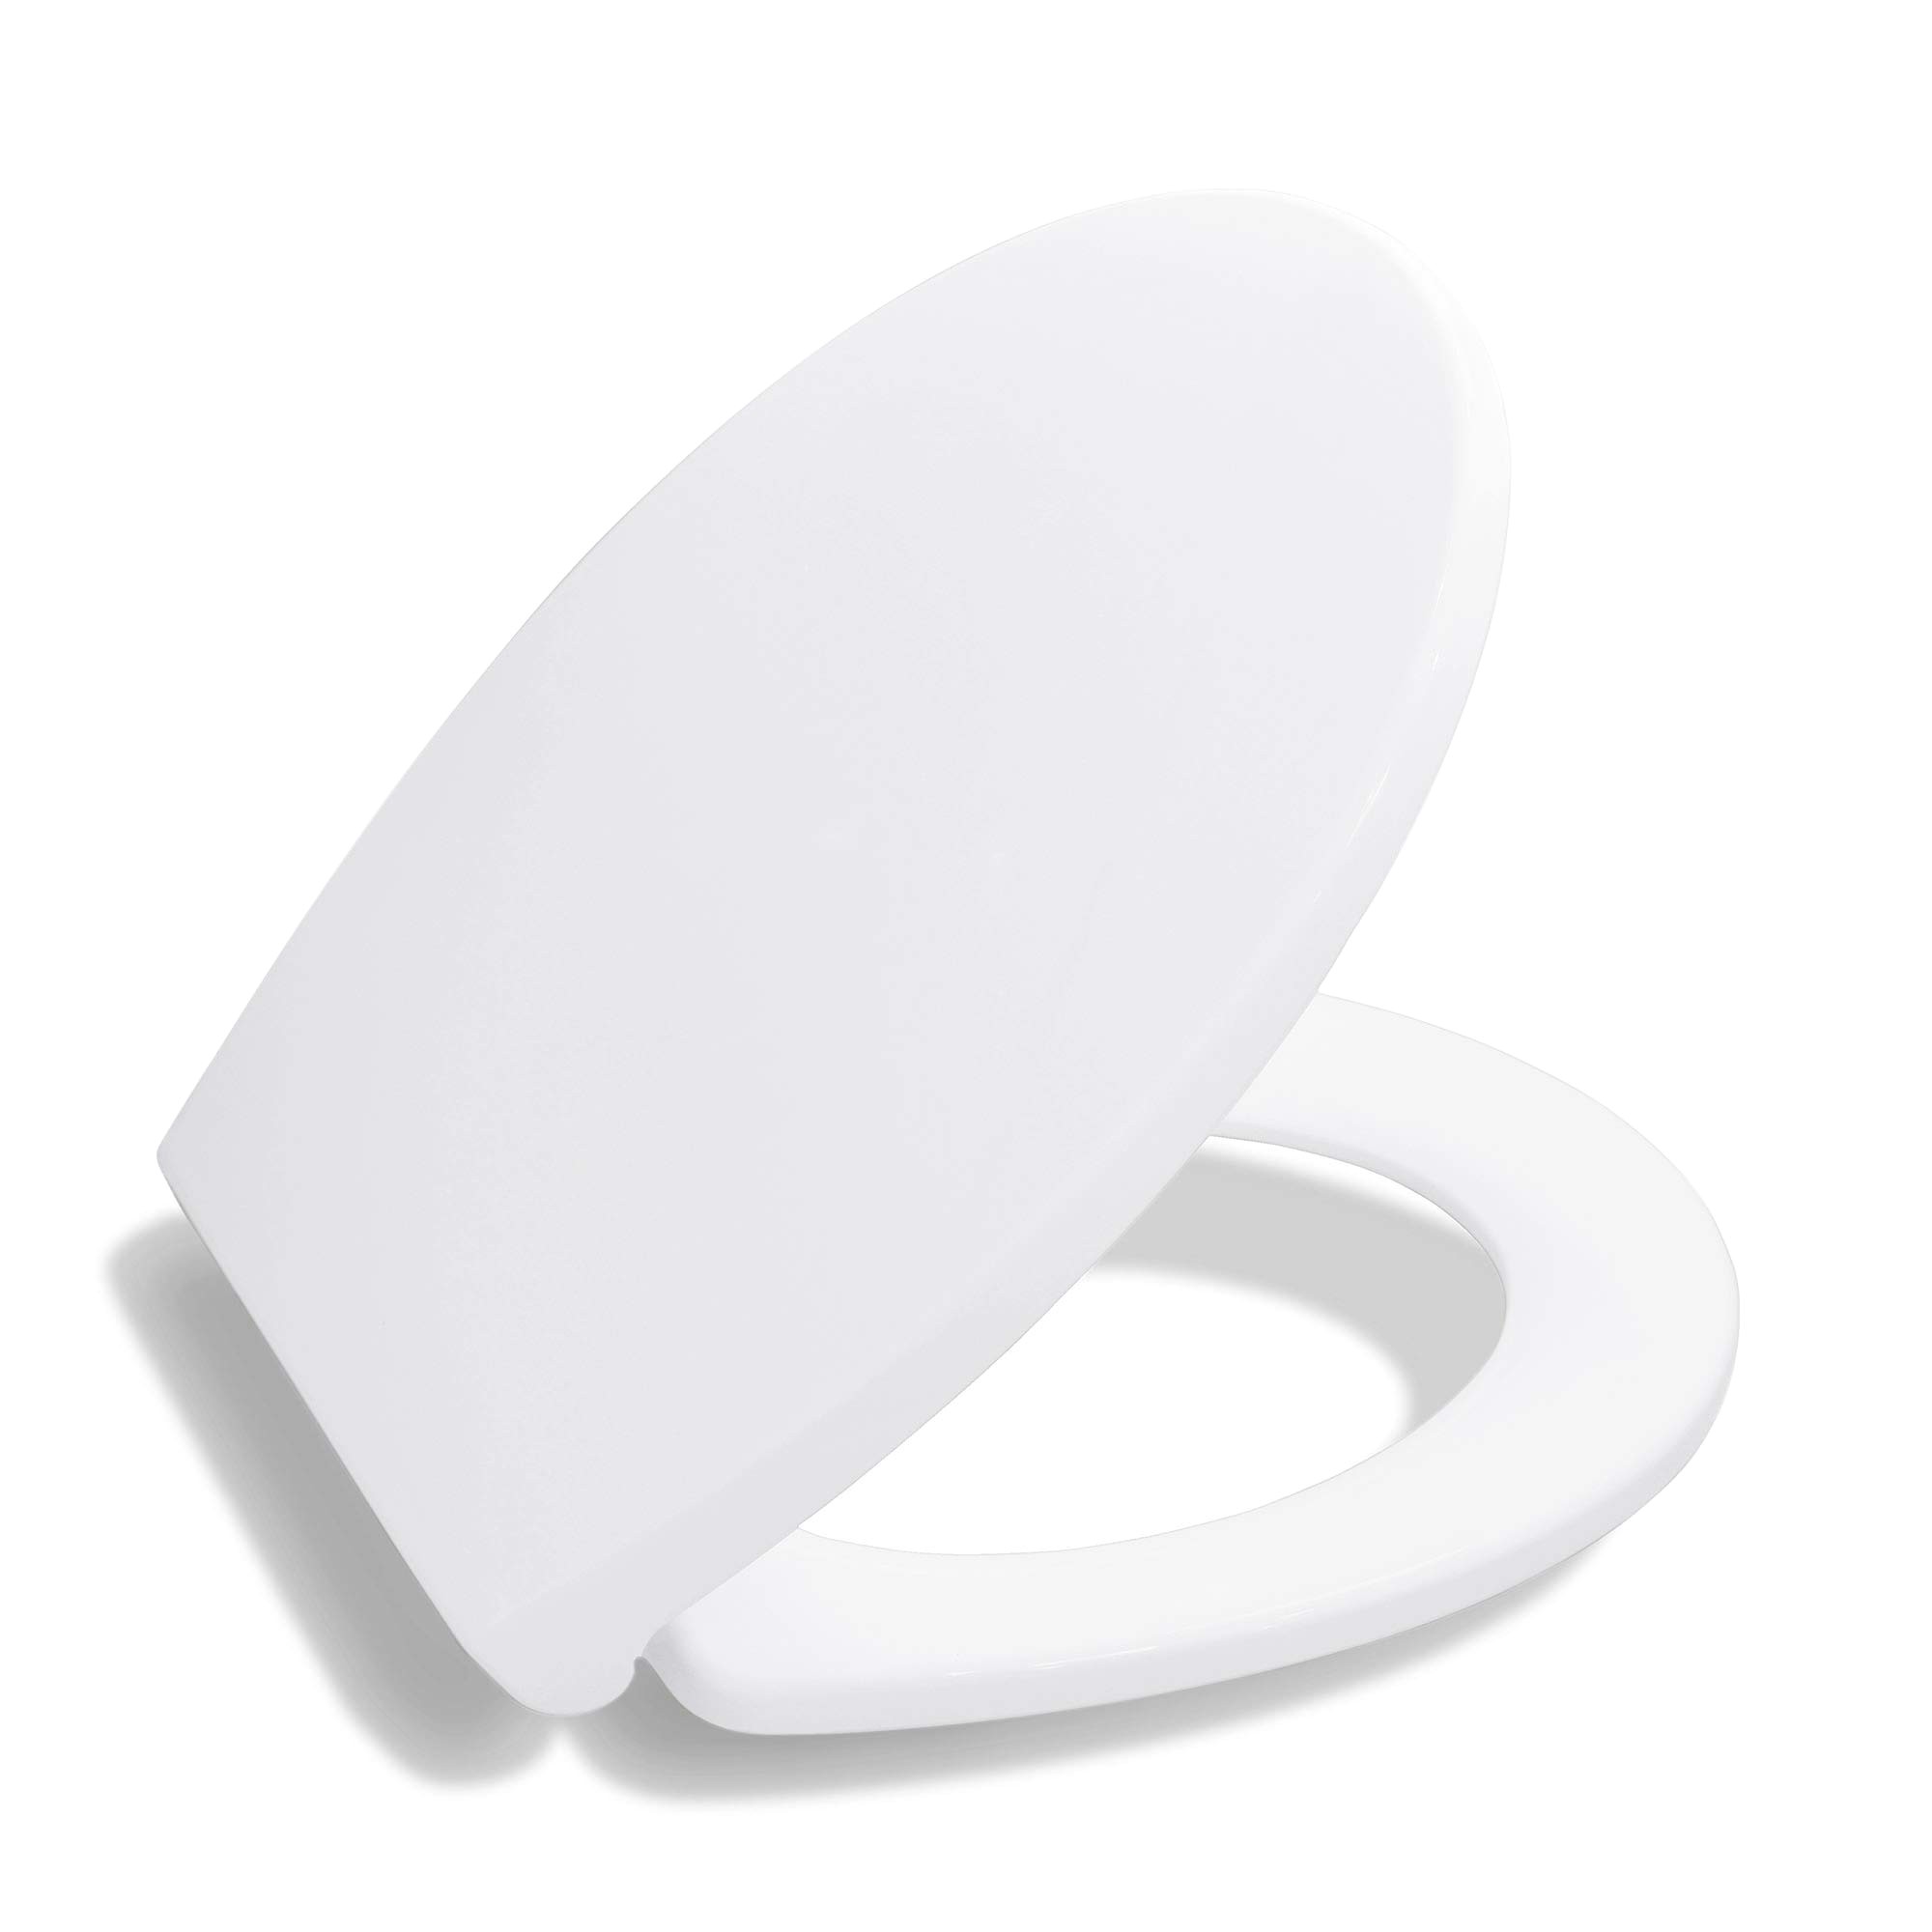 bath royale premium round toilet seat with cover white soft close quick release for easy cleaning fits all manufacturers round toilets